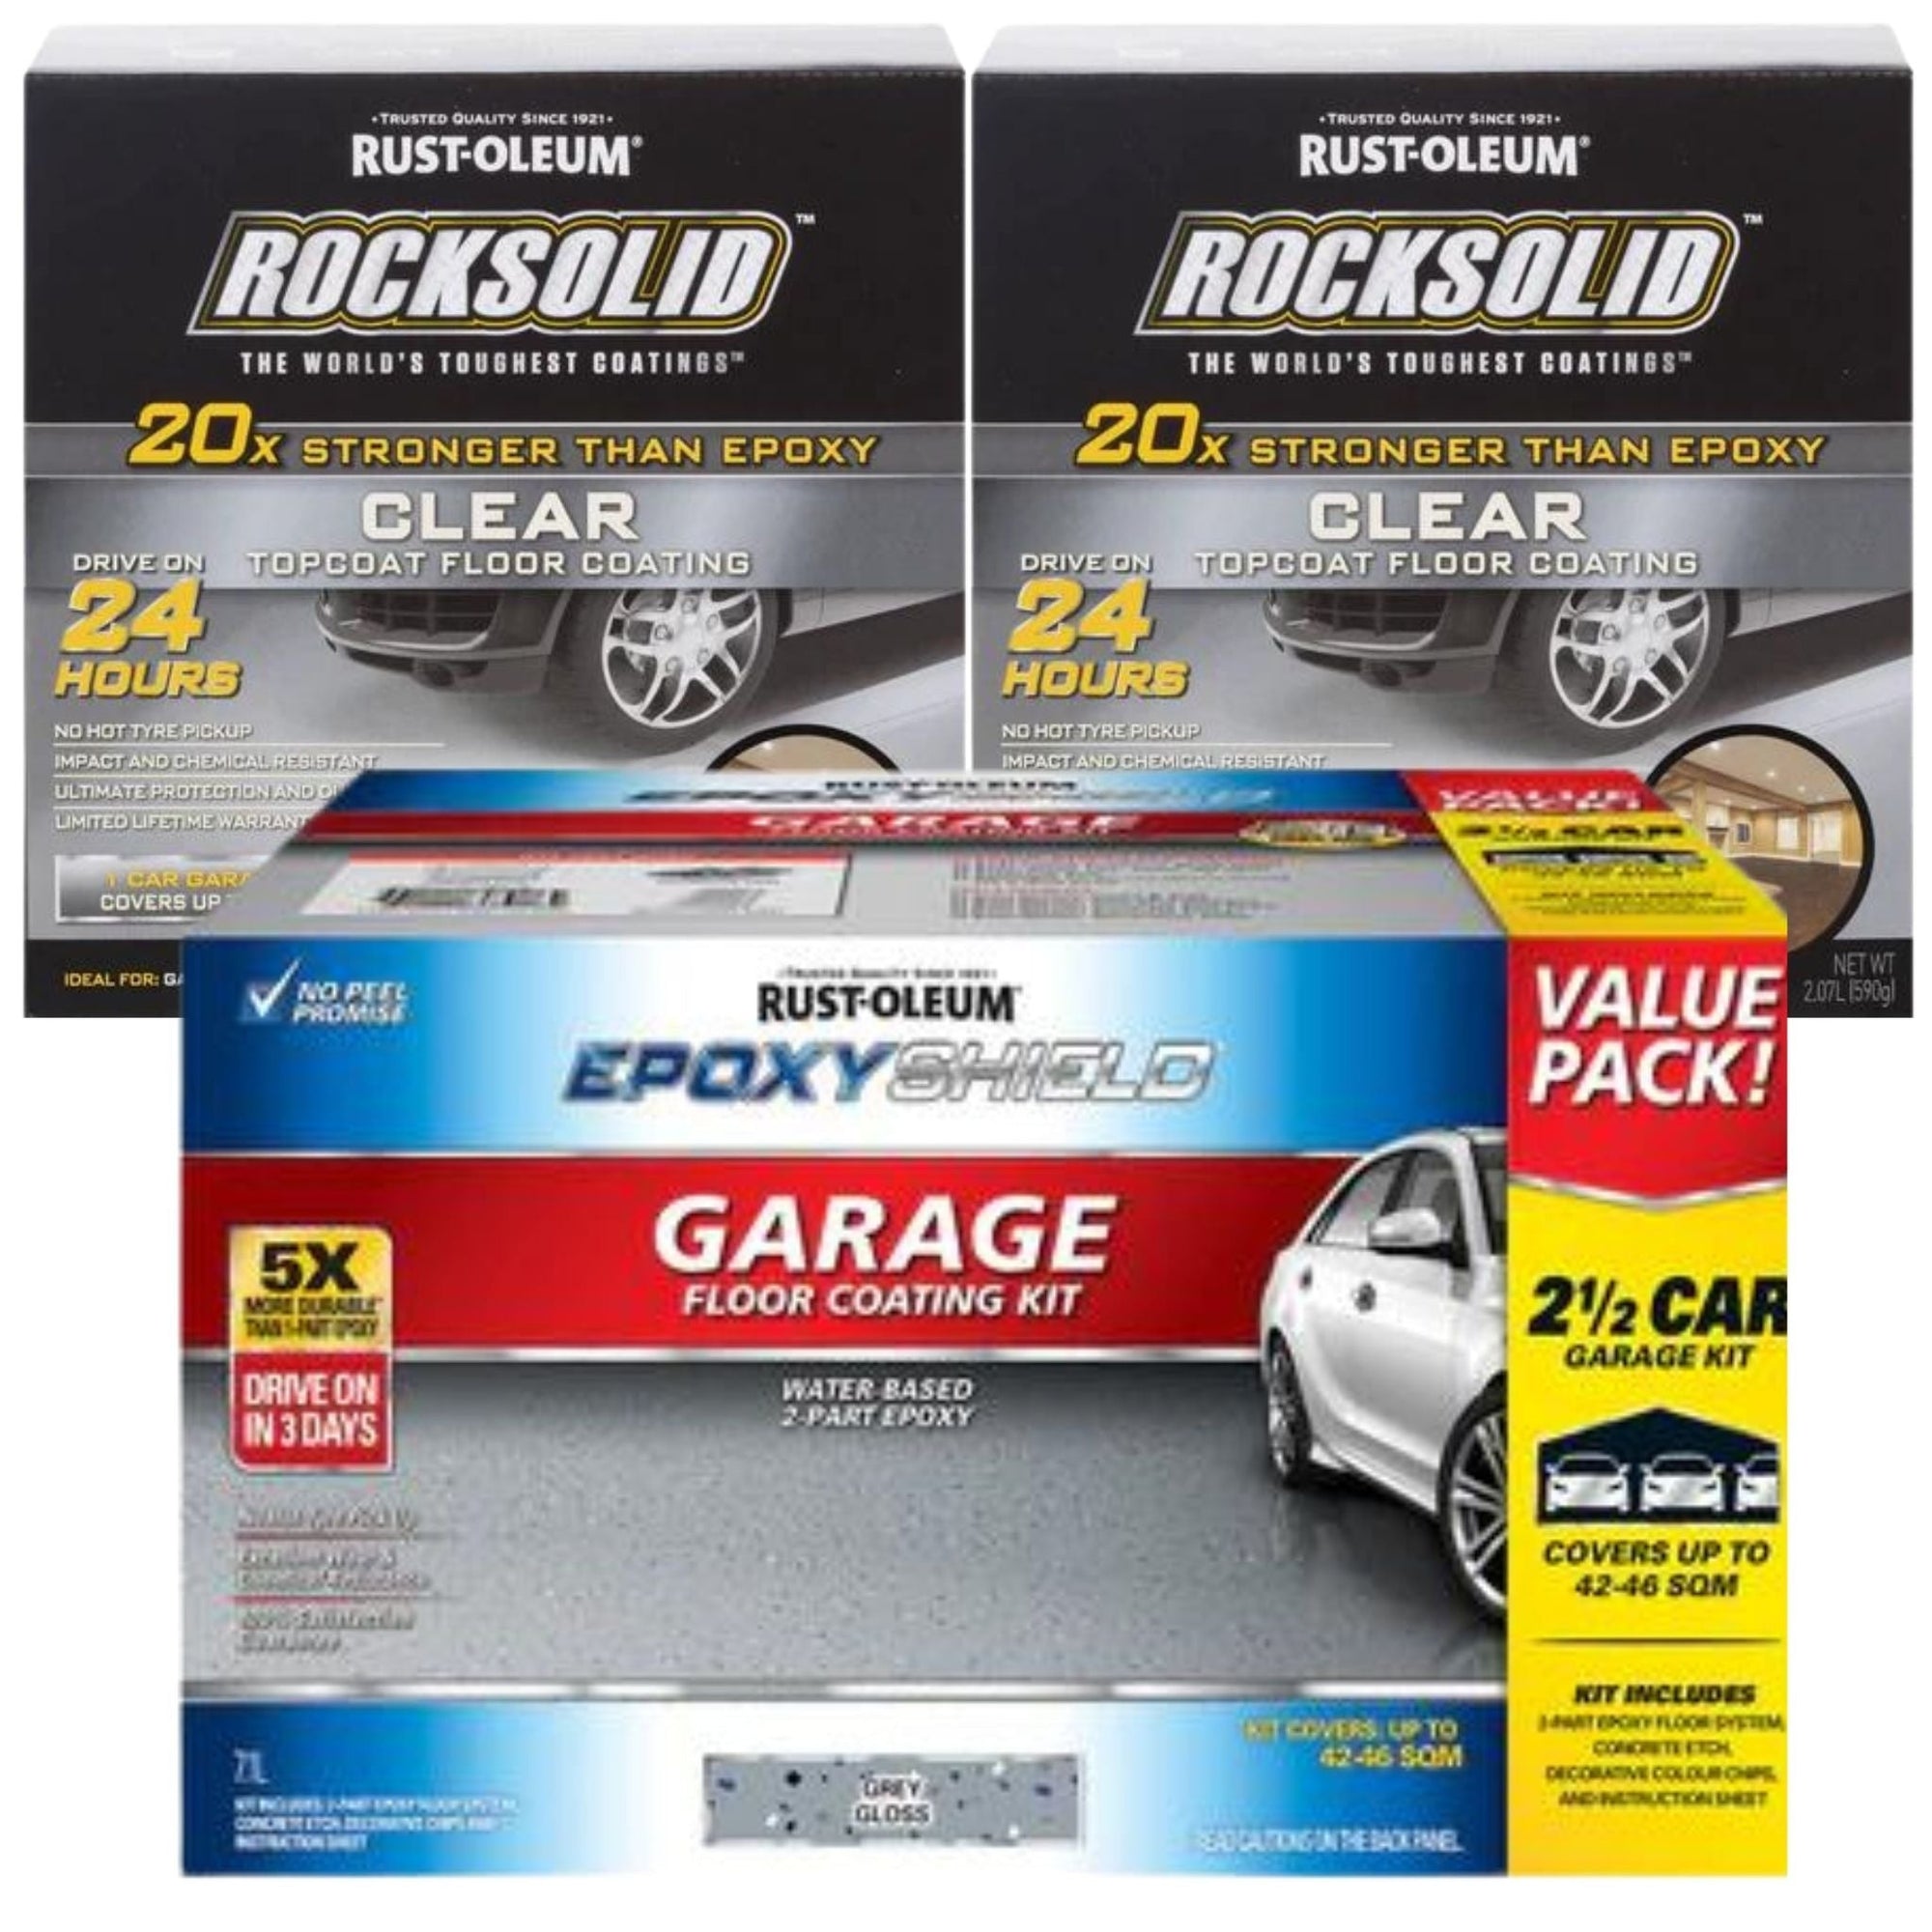 Rustoleum EPOXYSHIELD 2.5 Car Garage Floor Coating Kit + Top Coat- Gray Gloss - South East Clearance Centre